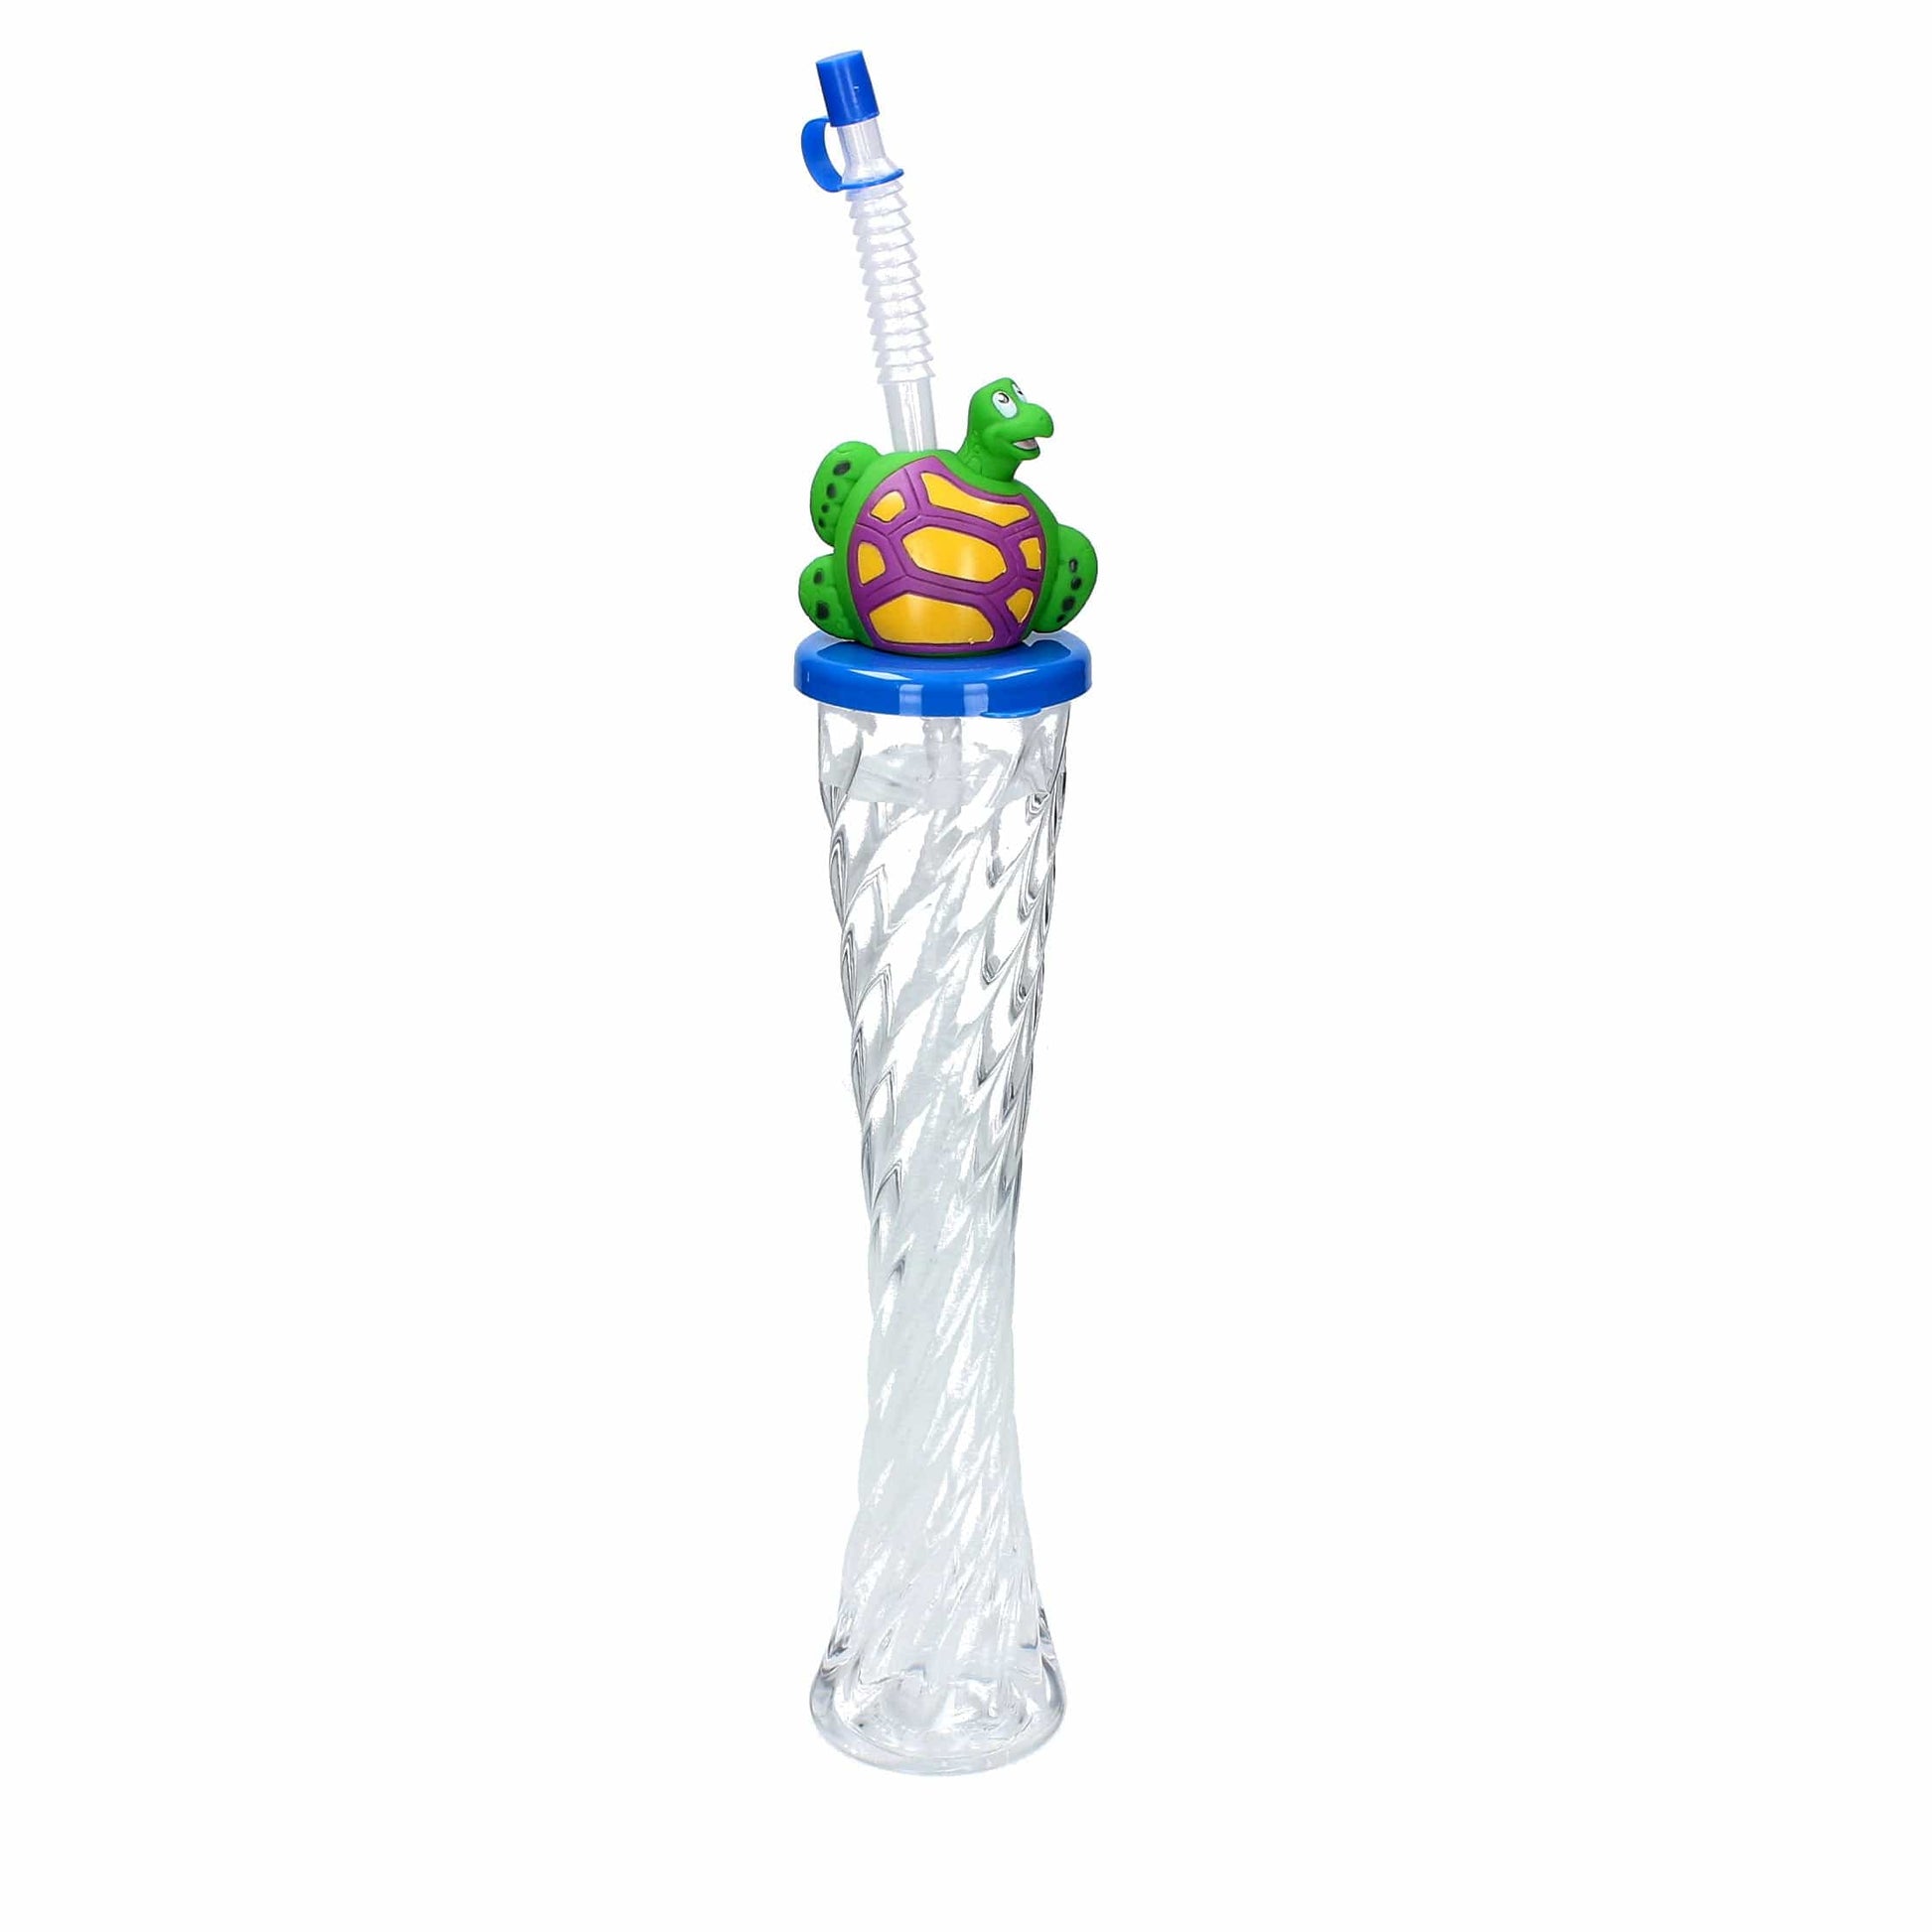 Sweet World USA Yard Cups Animals Twisty Cups (54 Cups) - for Cold or Frozen Drinks, Kids Parties - 12 oz. (350 ml) cups with lids and straws